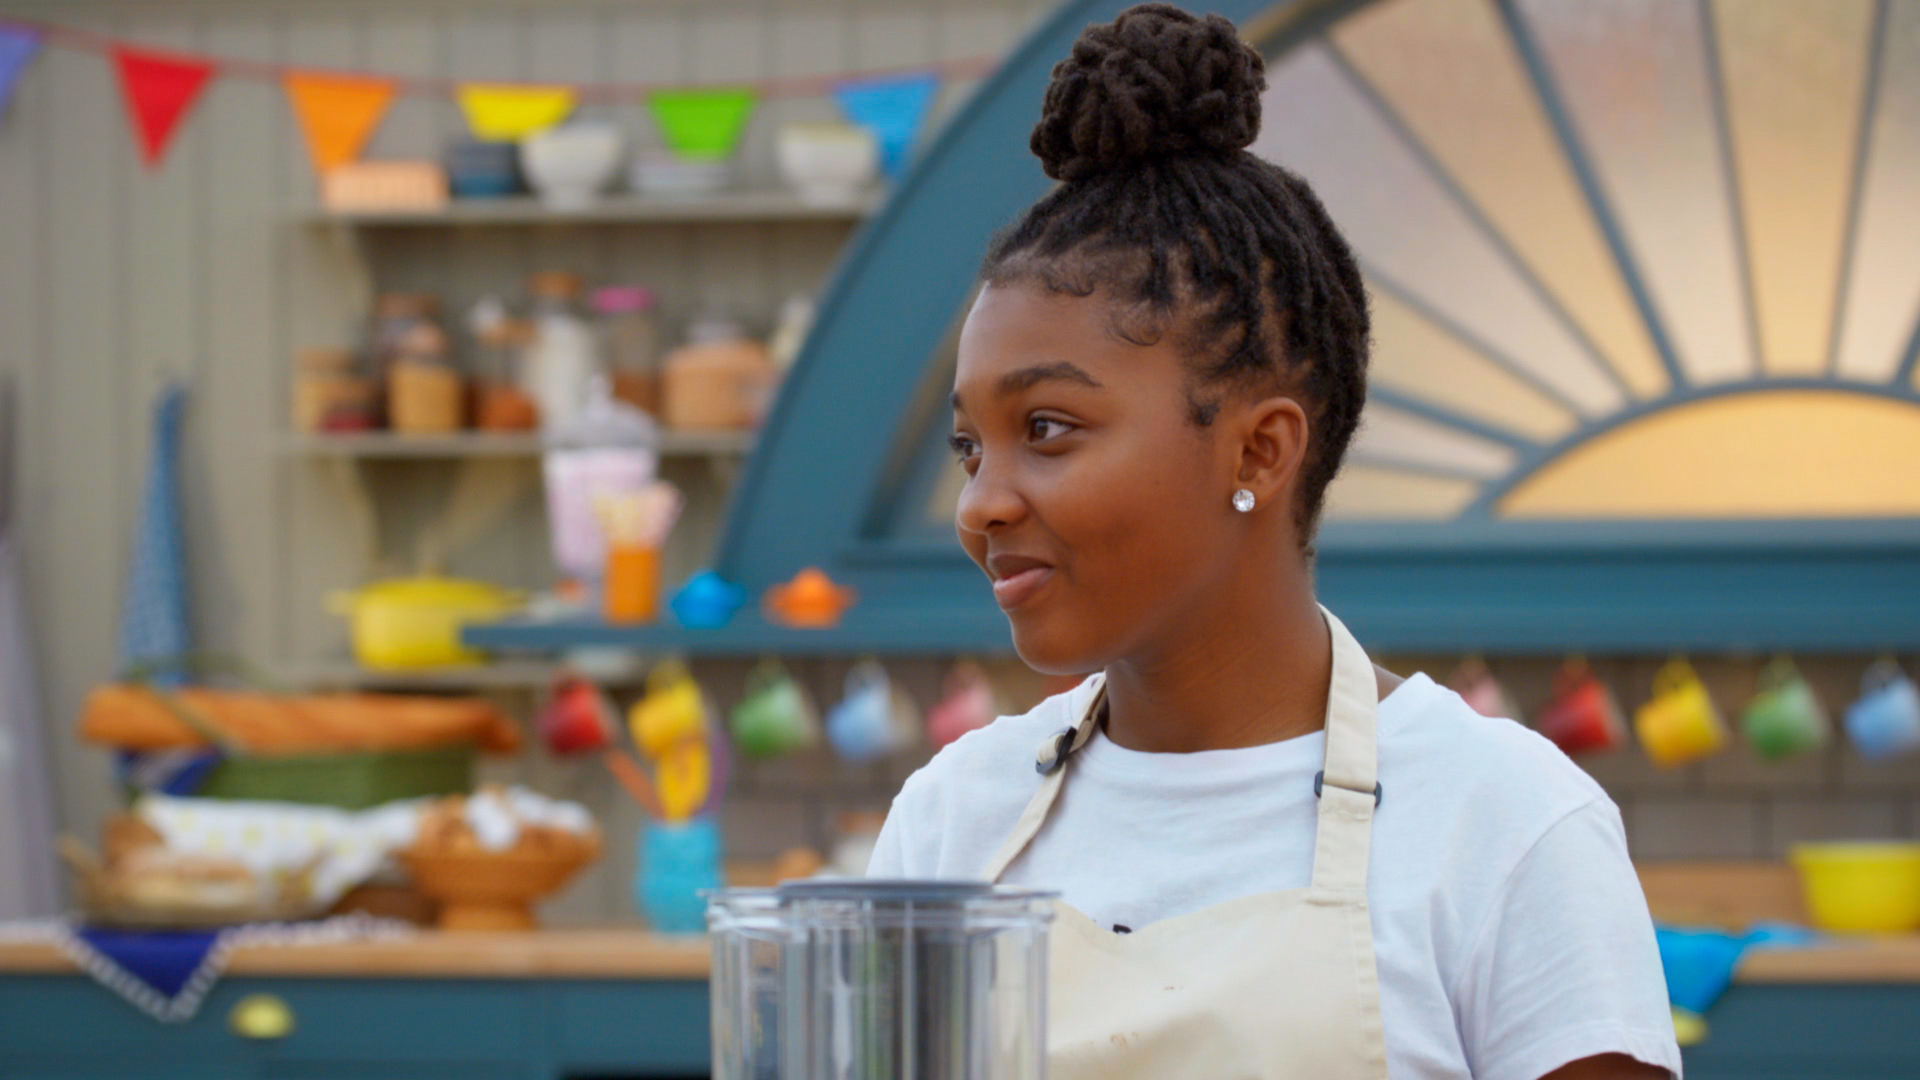 A young Black girl stands smiling in front of a blurred background of colorful kitchen appliances 